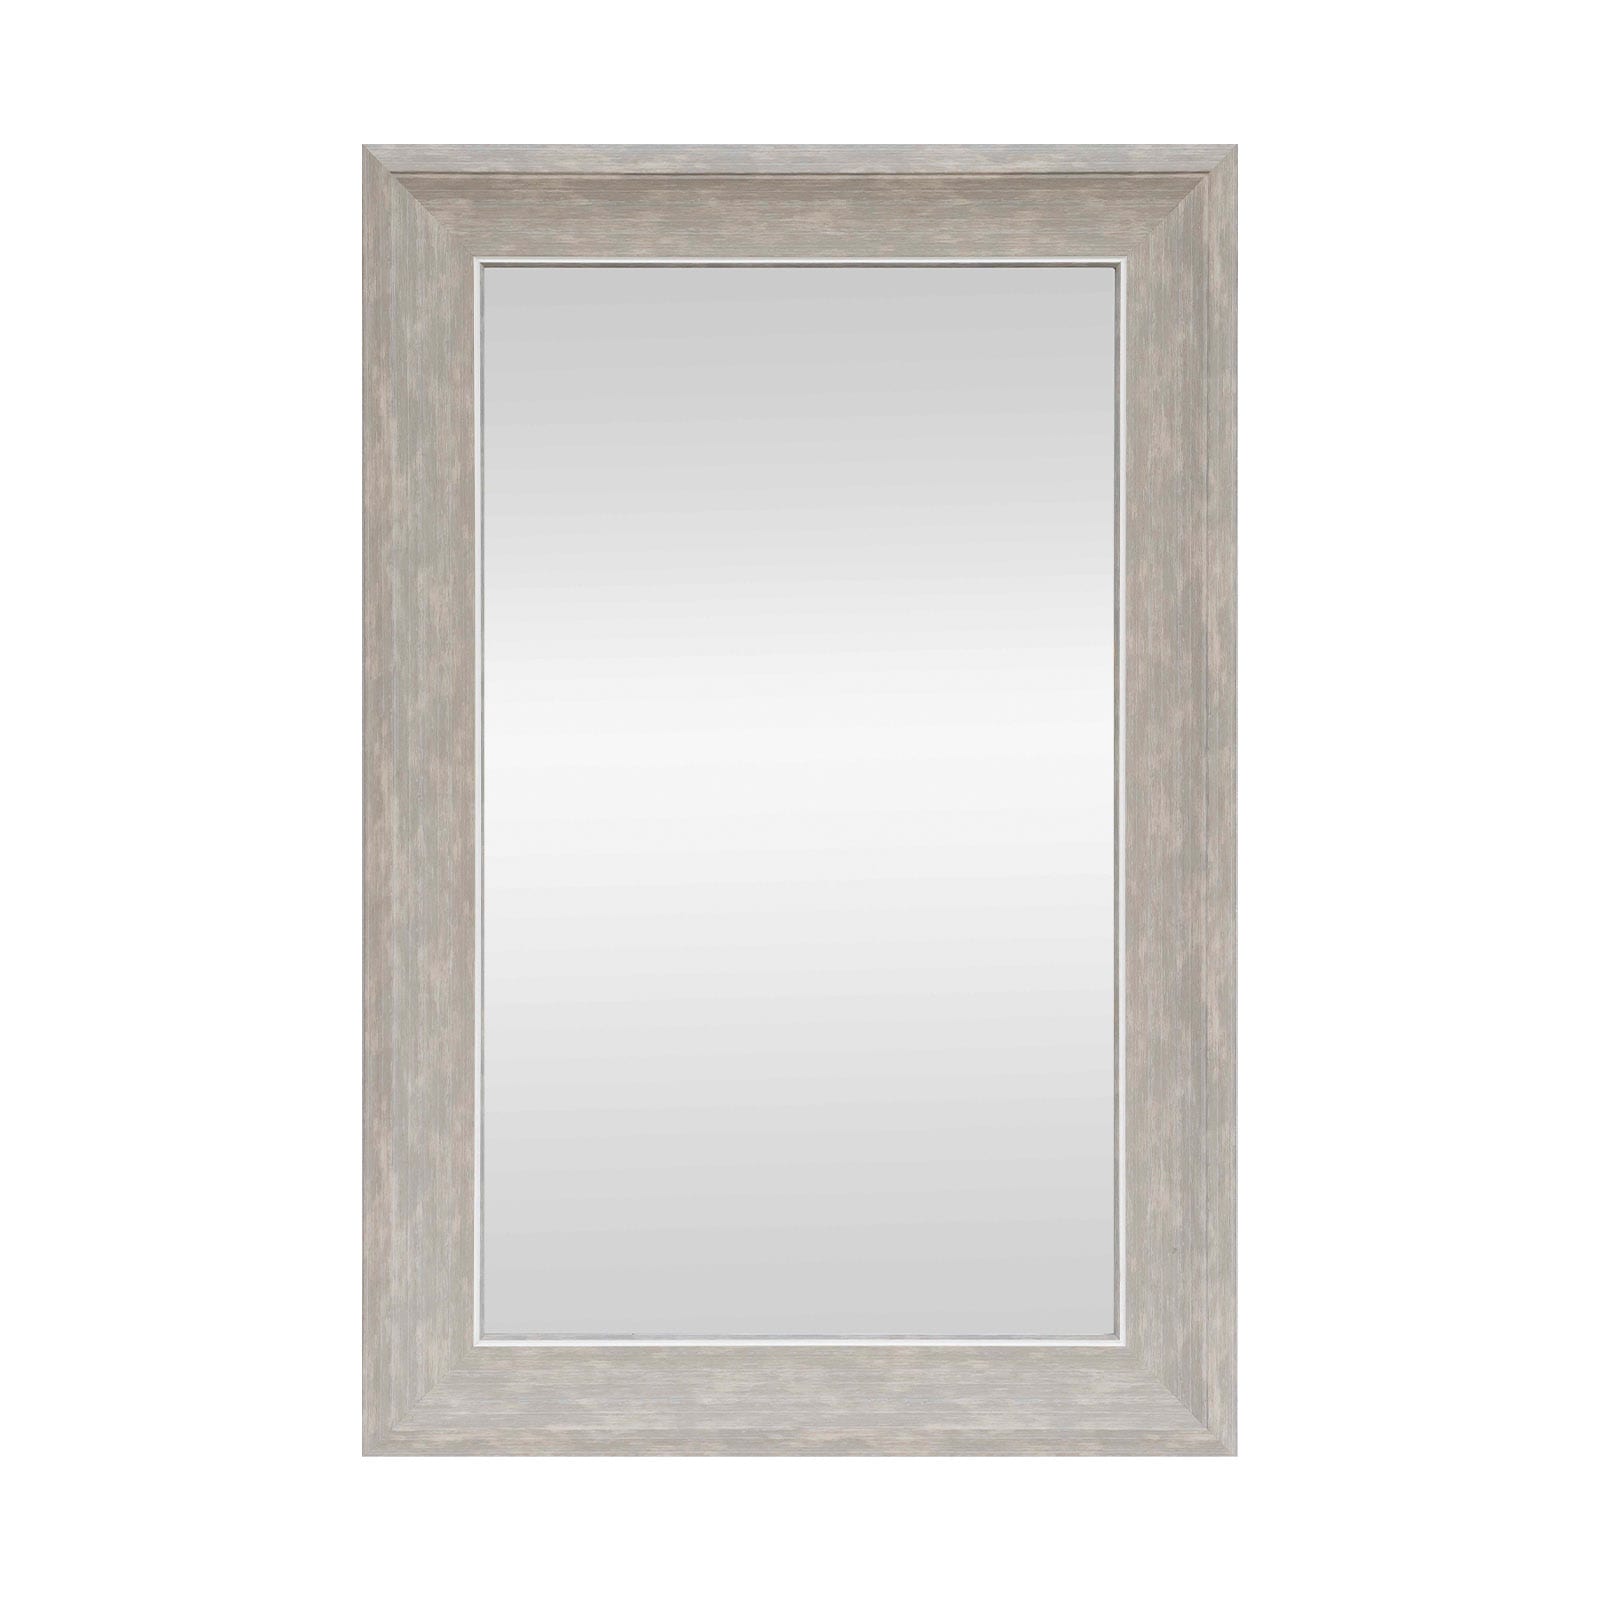 allen + roth 24-in W x 36-in H Wood Gray Framed Wall Mirror in the